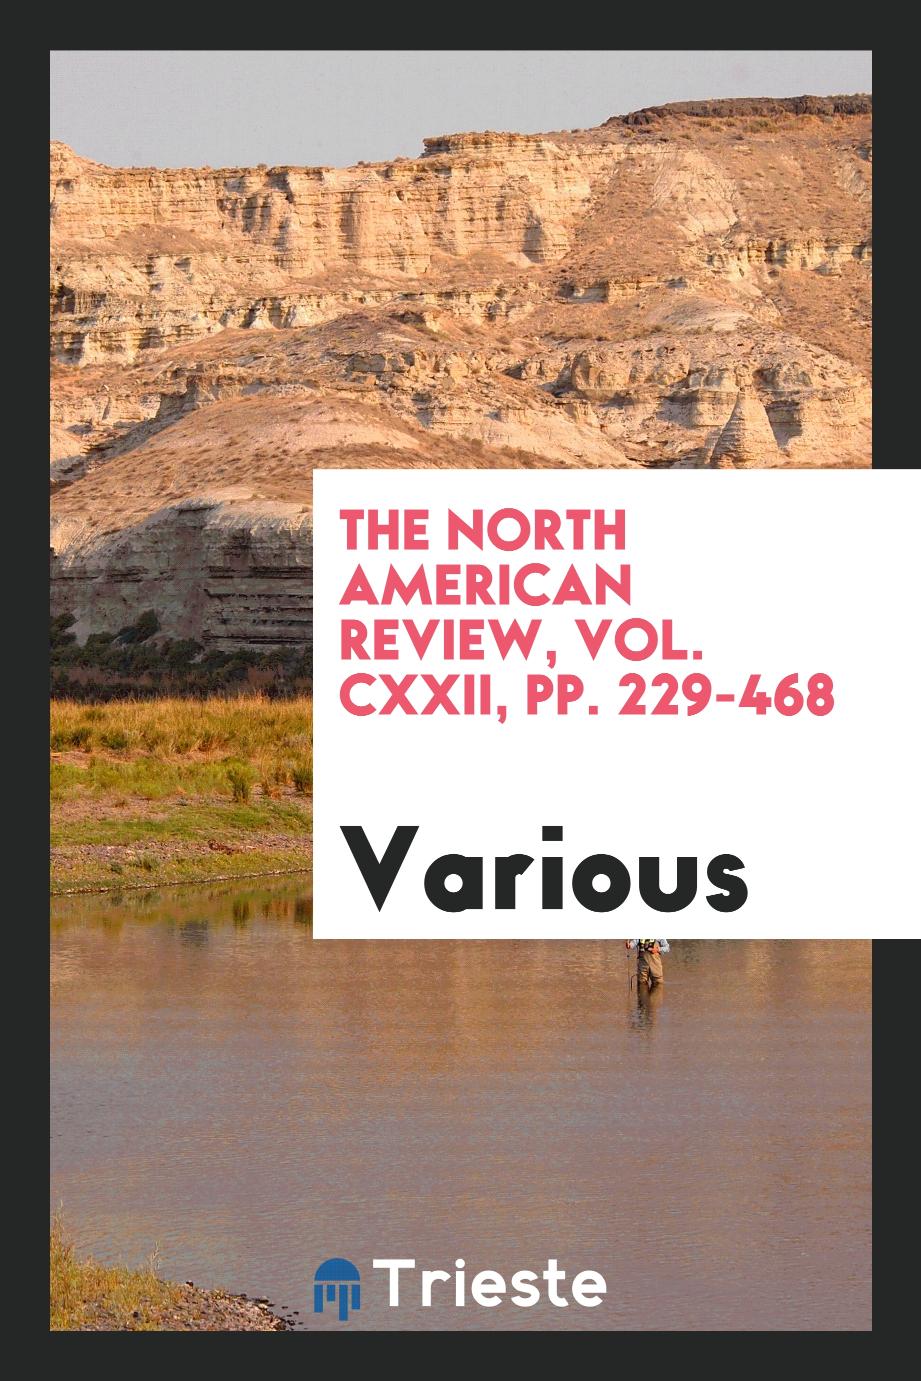 The North American Review, Vol. CXXII, pp. 229-468